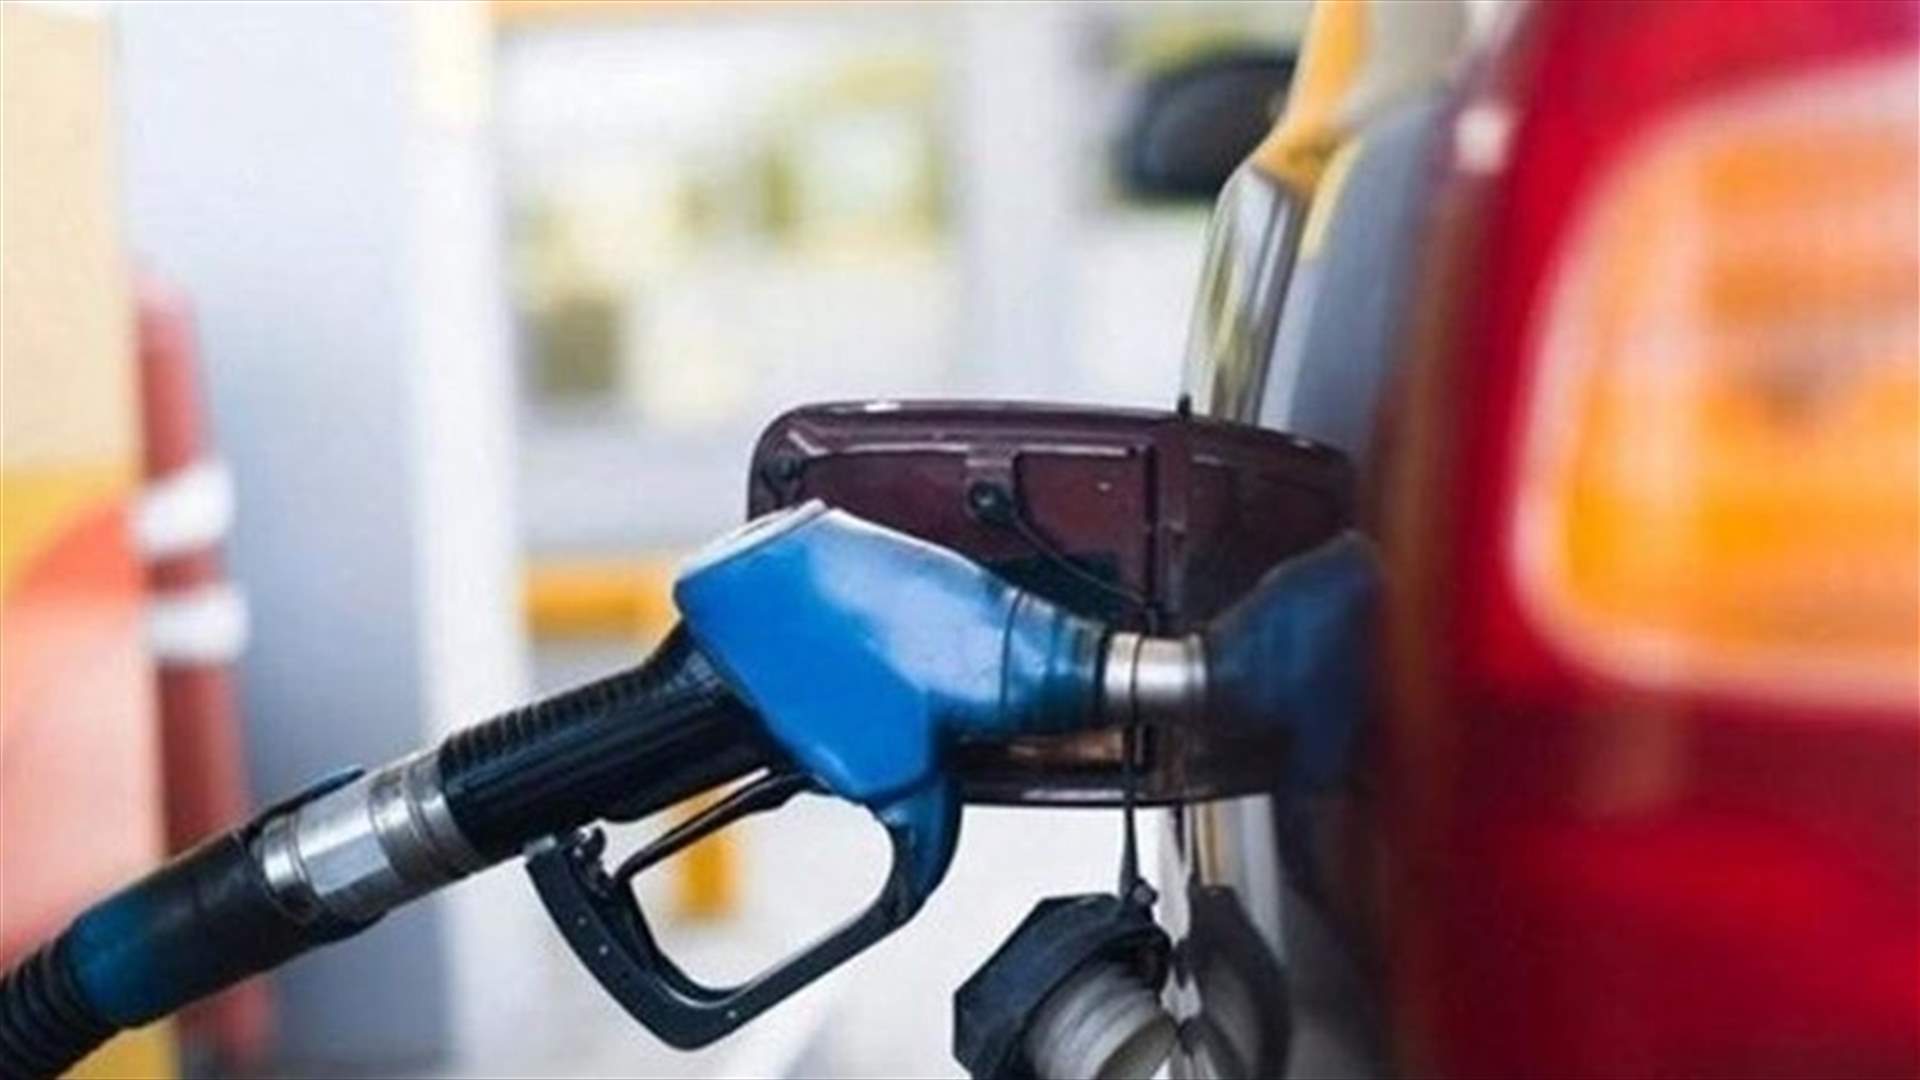 Prices of diesel oil and gas see slight drop